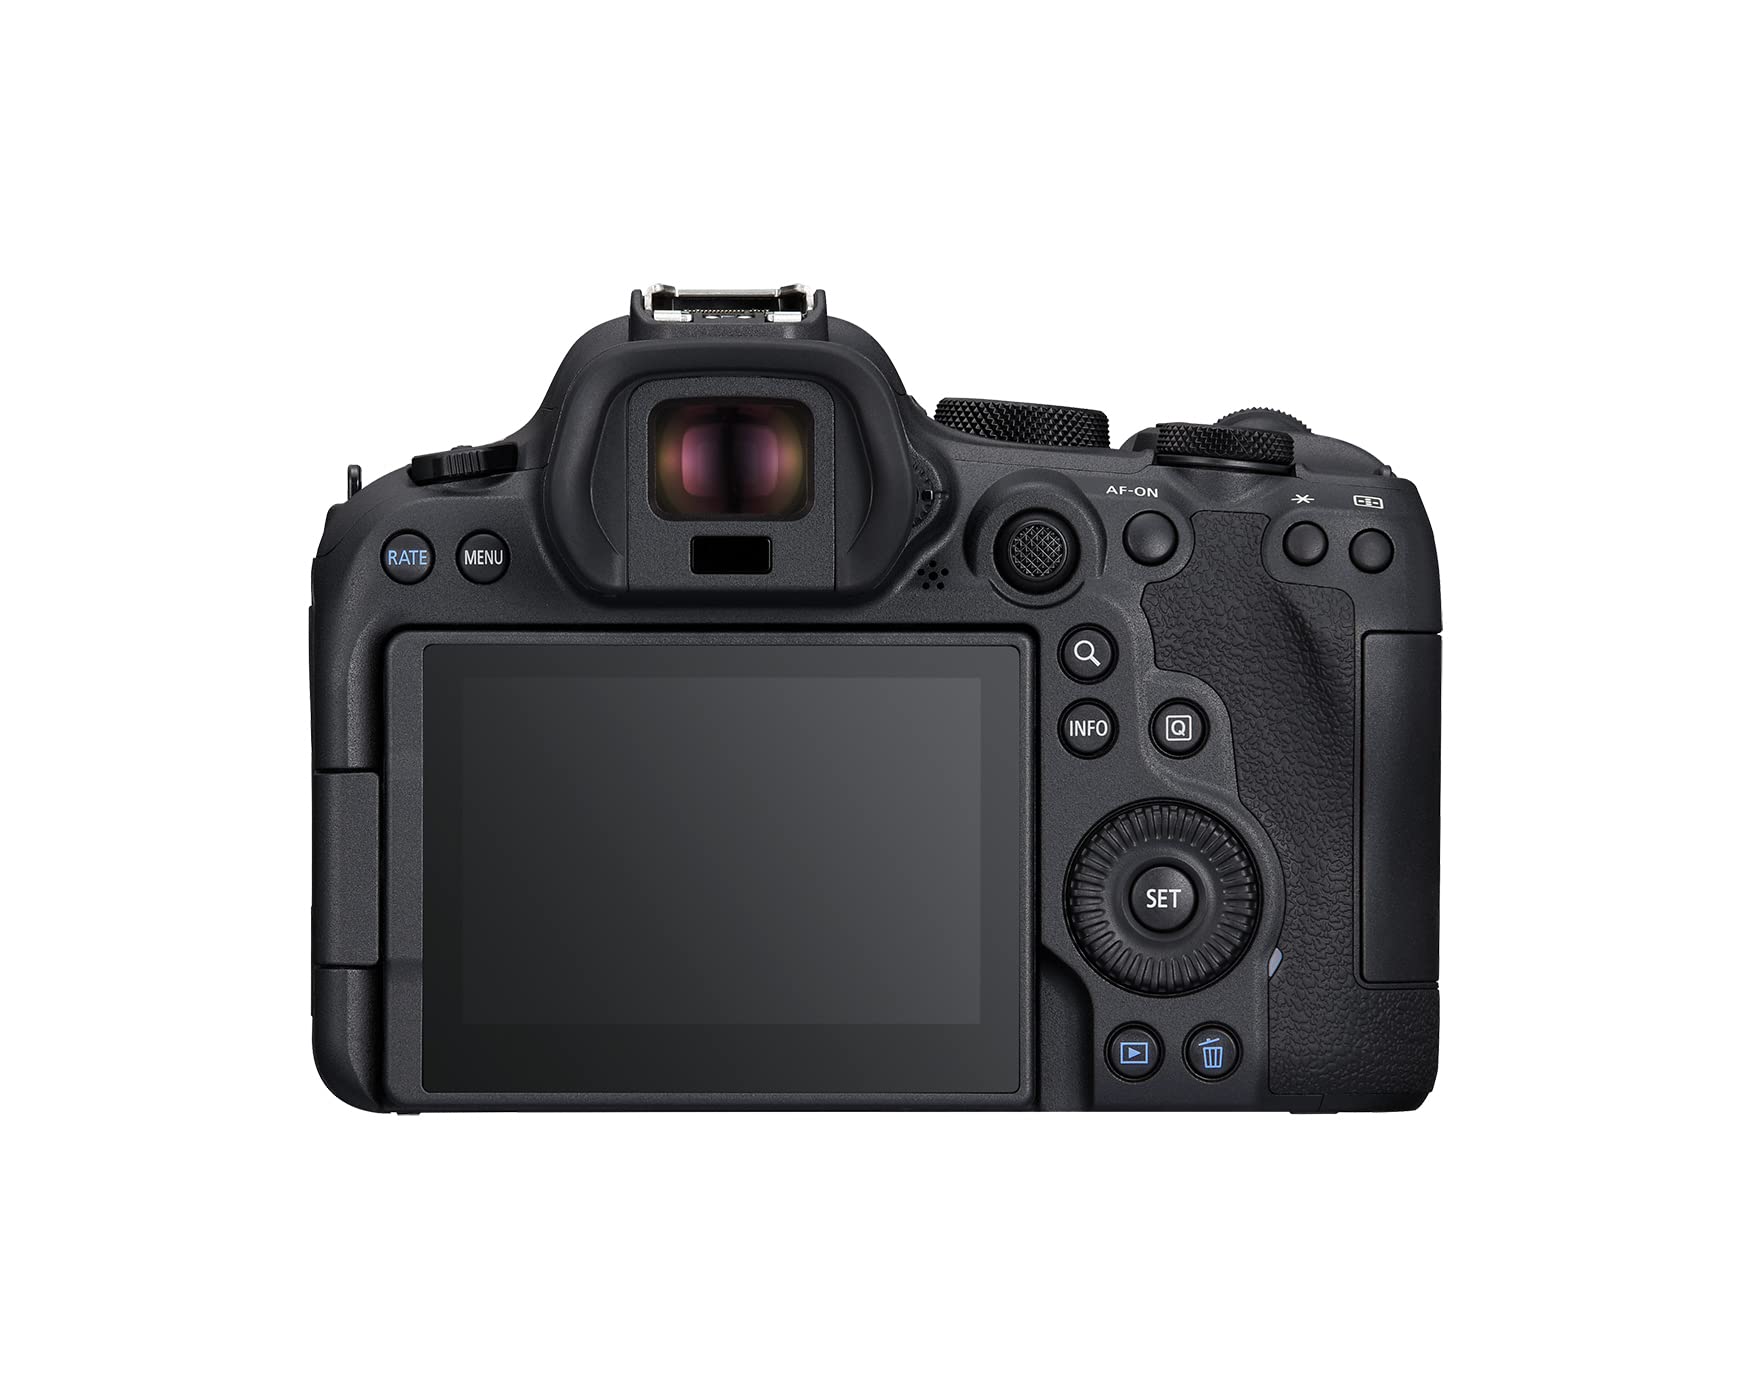 Canon EOS R6 Mark II Body with Stop Motion Animation Firmware